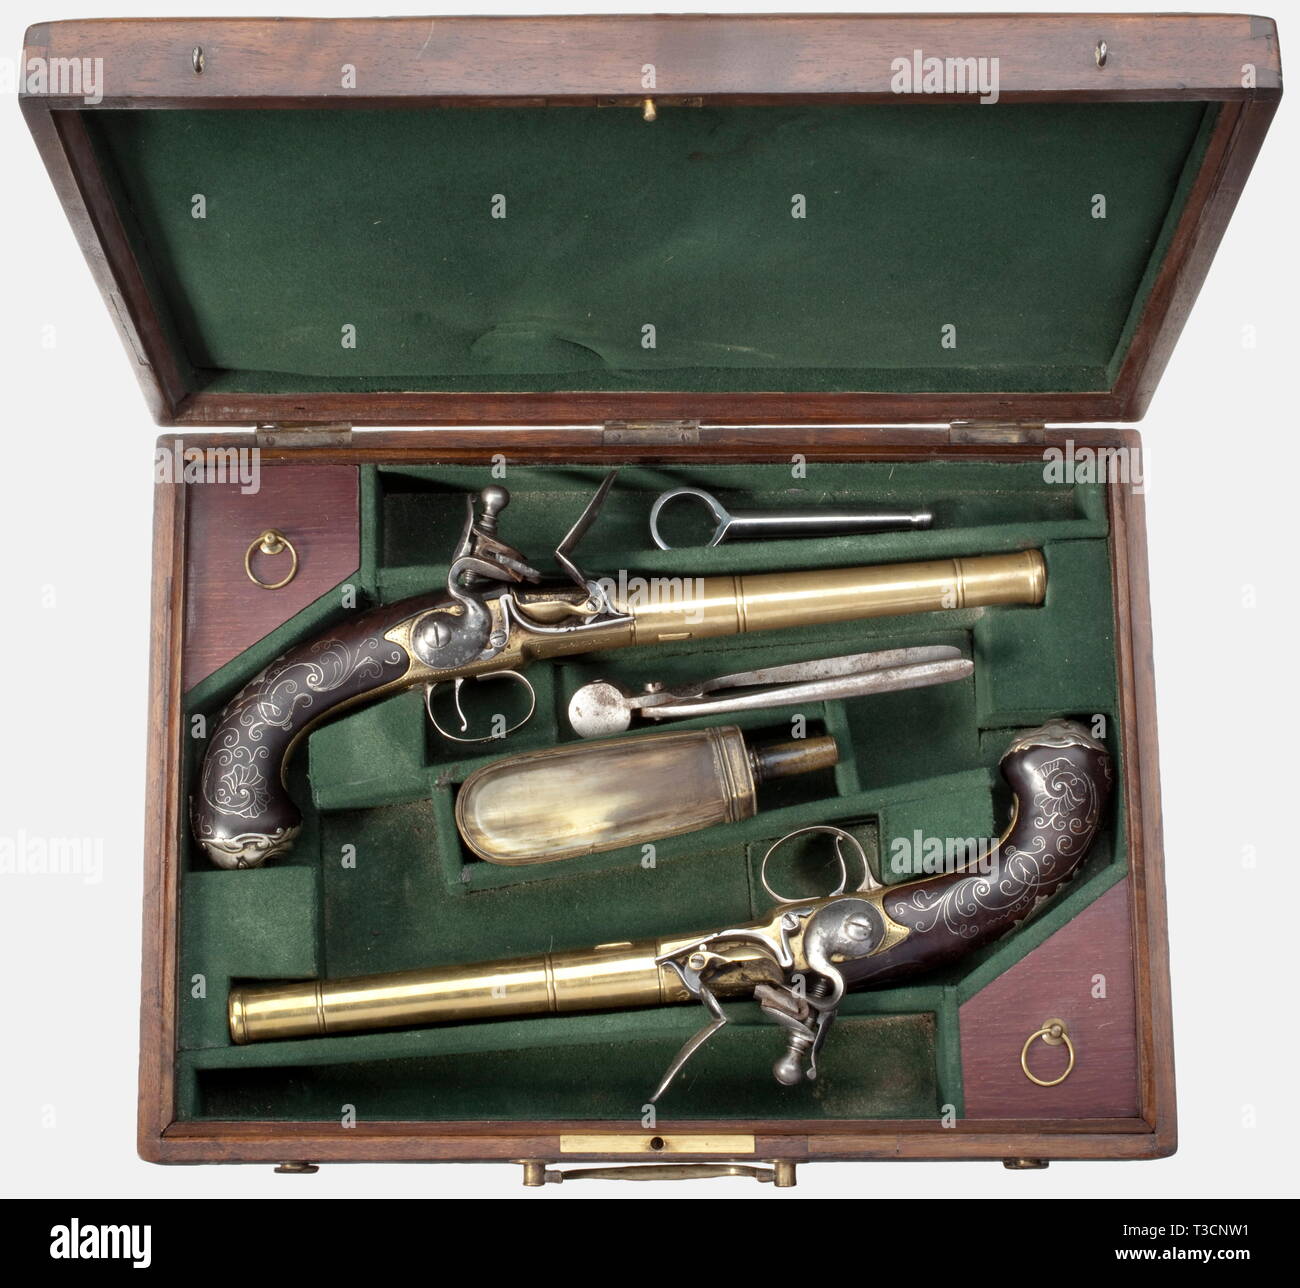 A cased pair of Queen Anne flintlock pistols, England, circa 1740. Smooth brass screw-barrels with lugs in 14 mm calibre with cannon muzzles. Floral engraved brass boxlocks inscribed 'LONDON' on the bottom along with English proof marks. Walnut grips with silver wire inlay, silver furniture decorated in relief, and grotesque mask pommel caps. Length of each 32.5 cm. In a later, velvet lined wooden case with a lug wrench, bullet mould, and powder horn. Key missing. Dimensions 36.5 x 27 x 7.5 cm. historic, historical, 18th century, civil handgun, c, Additional-Rights-Clearance-Info-Not-Available Stock Photo